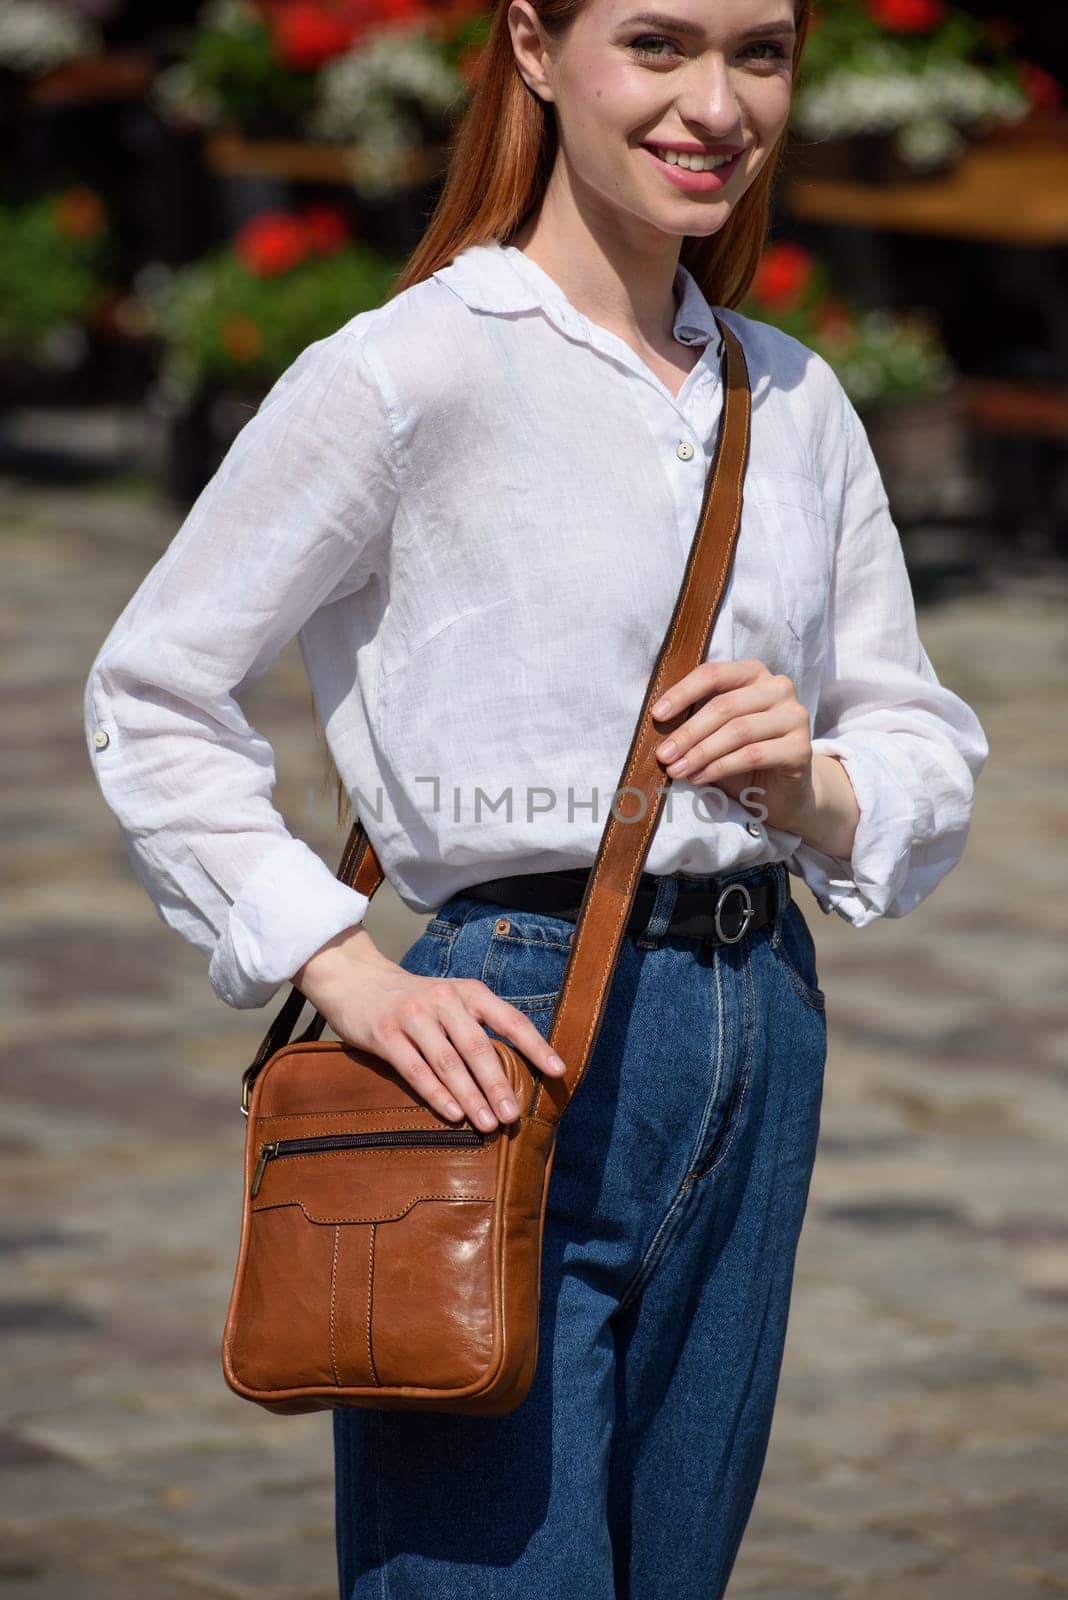 photo of a woman with a small yellow leather bag. the girl is dressed in jeans and white blouse